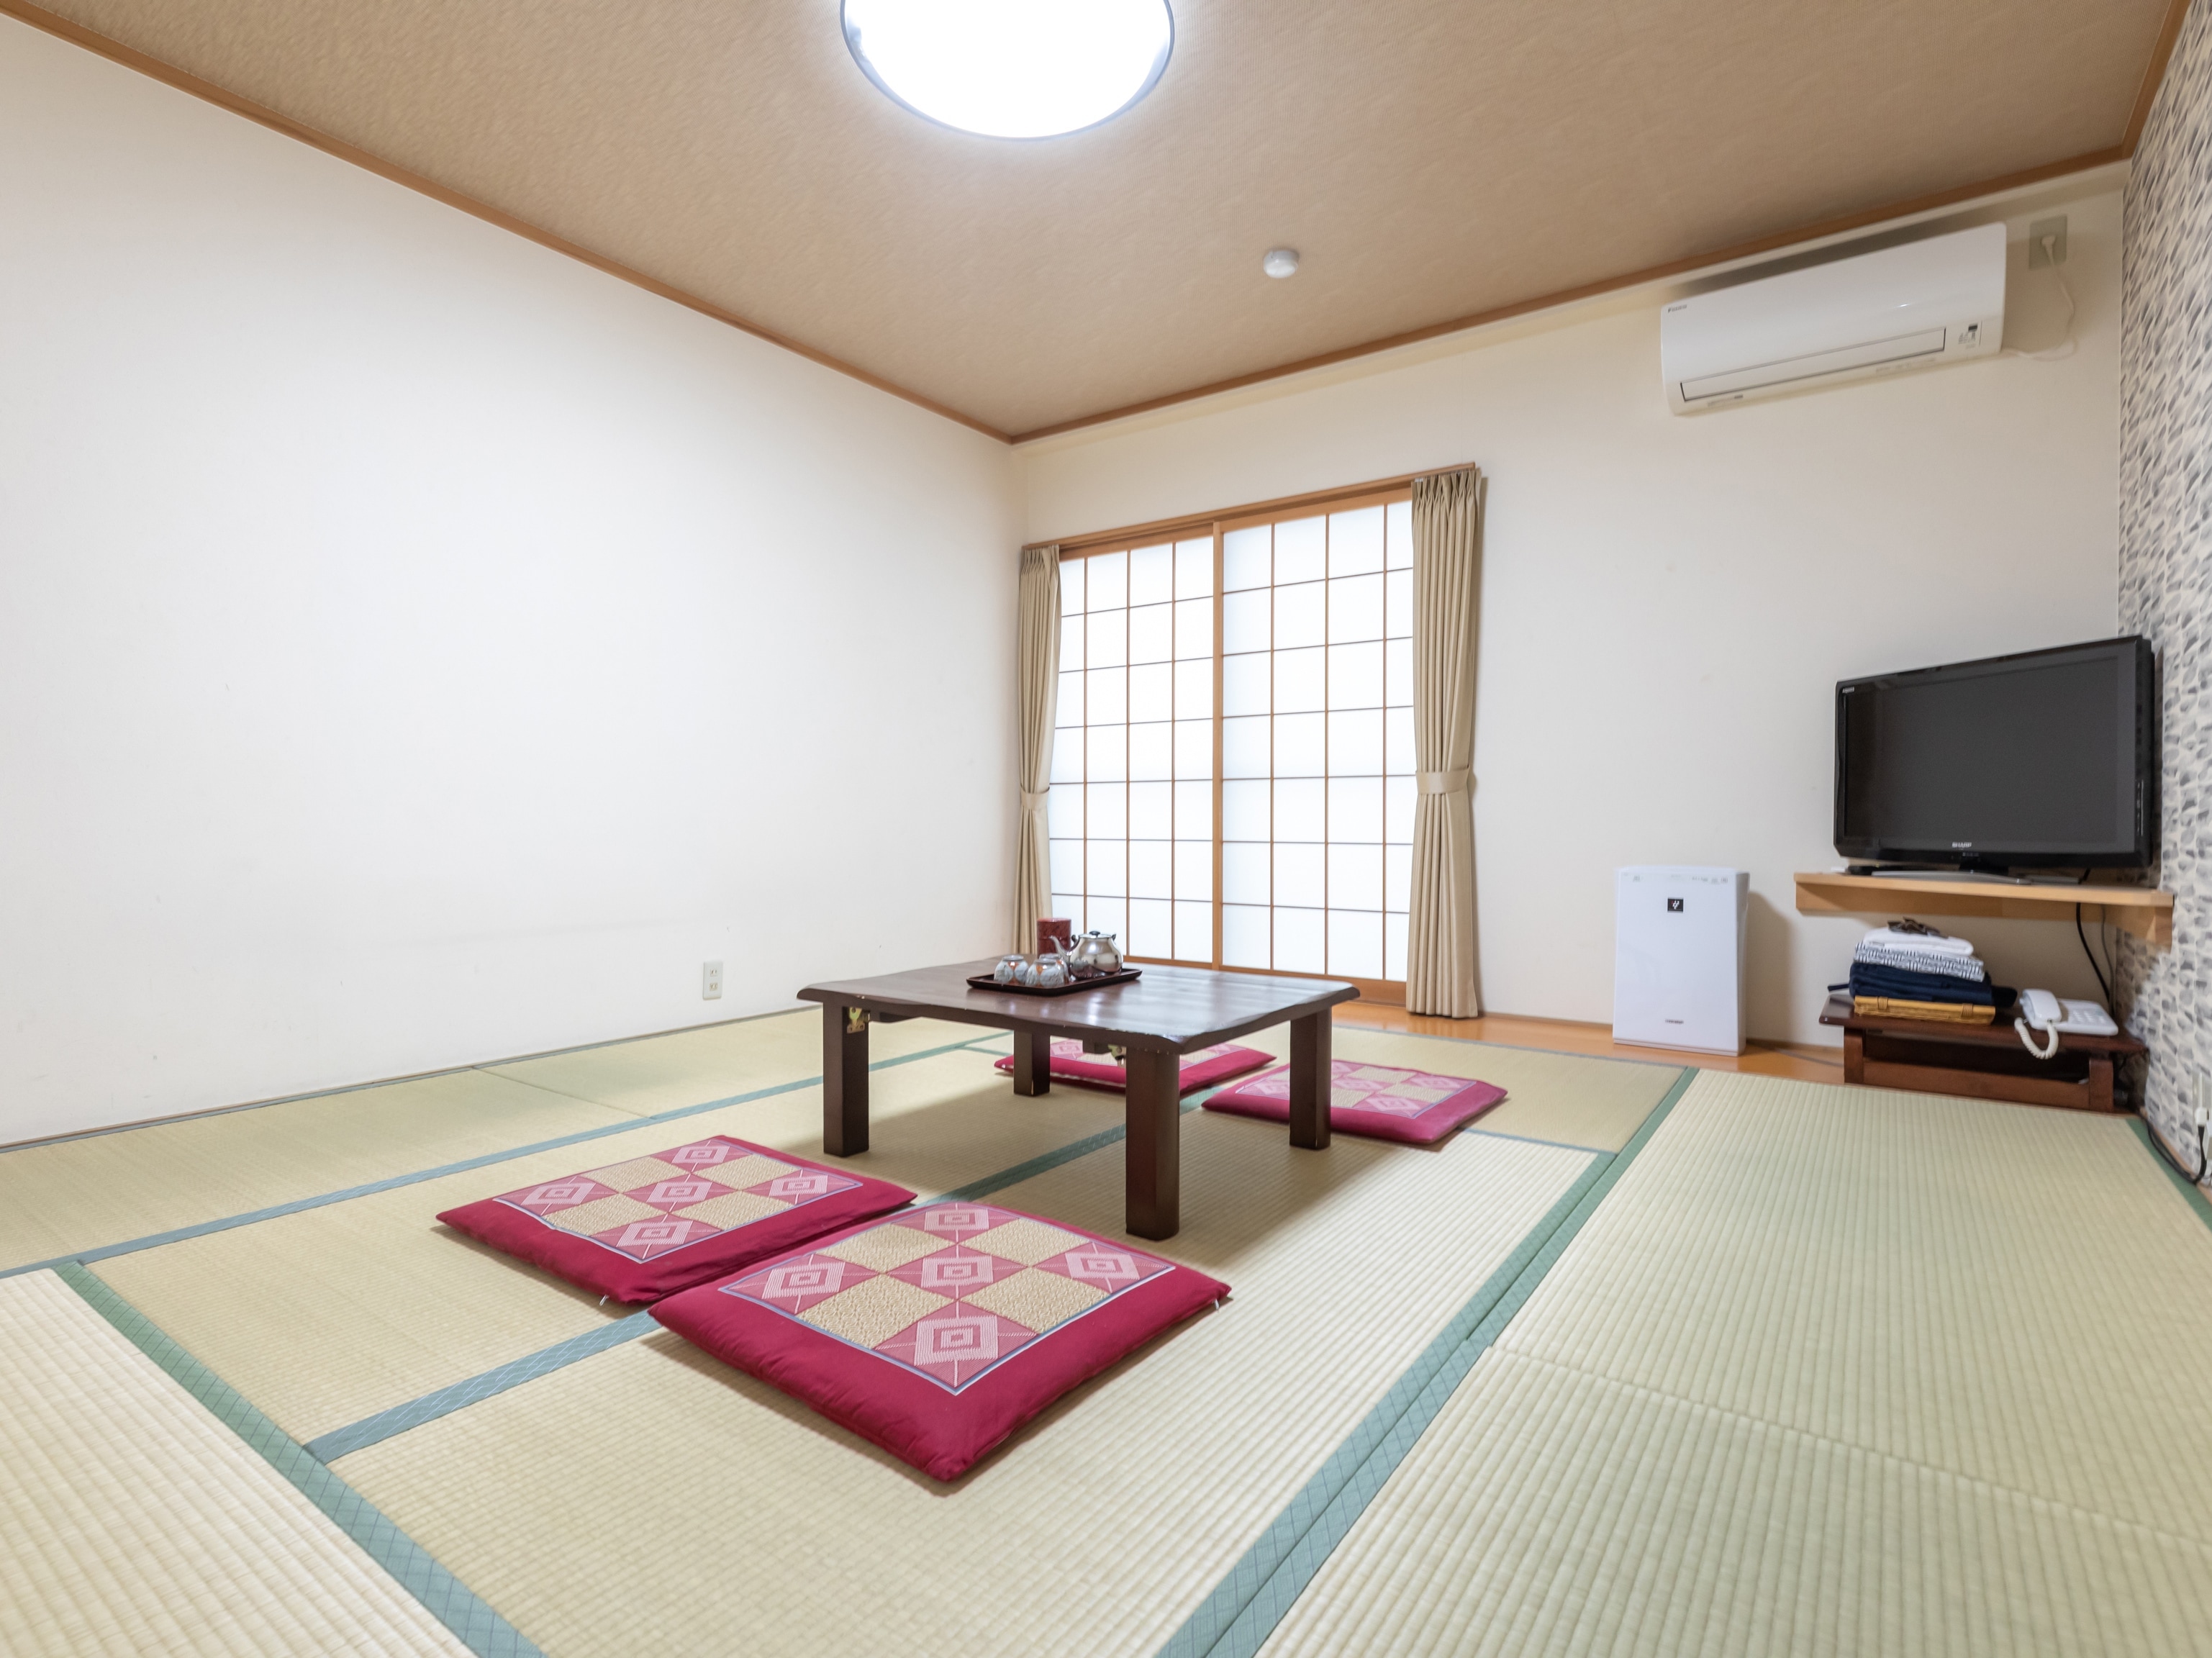 [Non-smoking] Japanese-style room for 1 to 4 people (no bath or toilet)